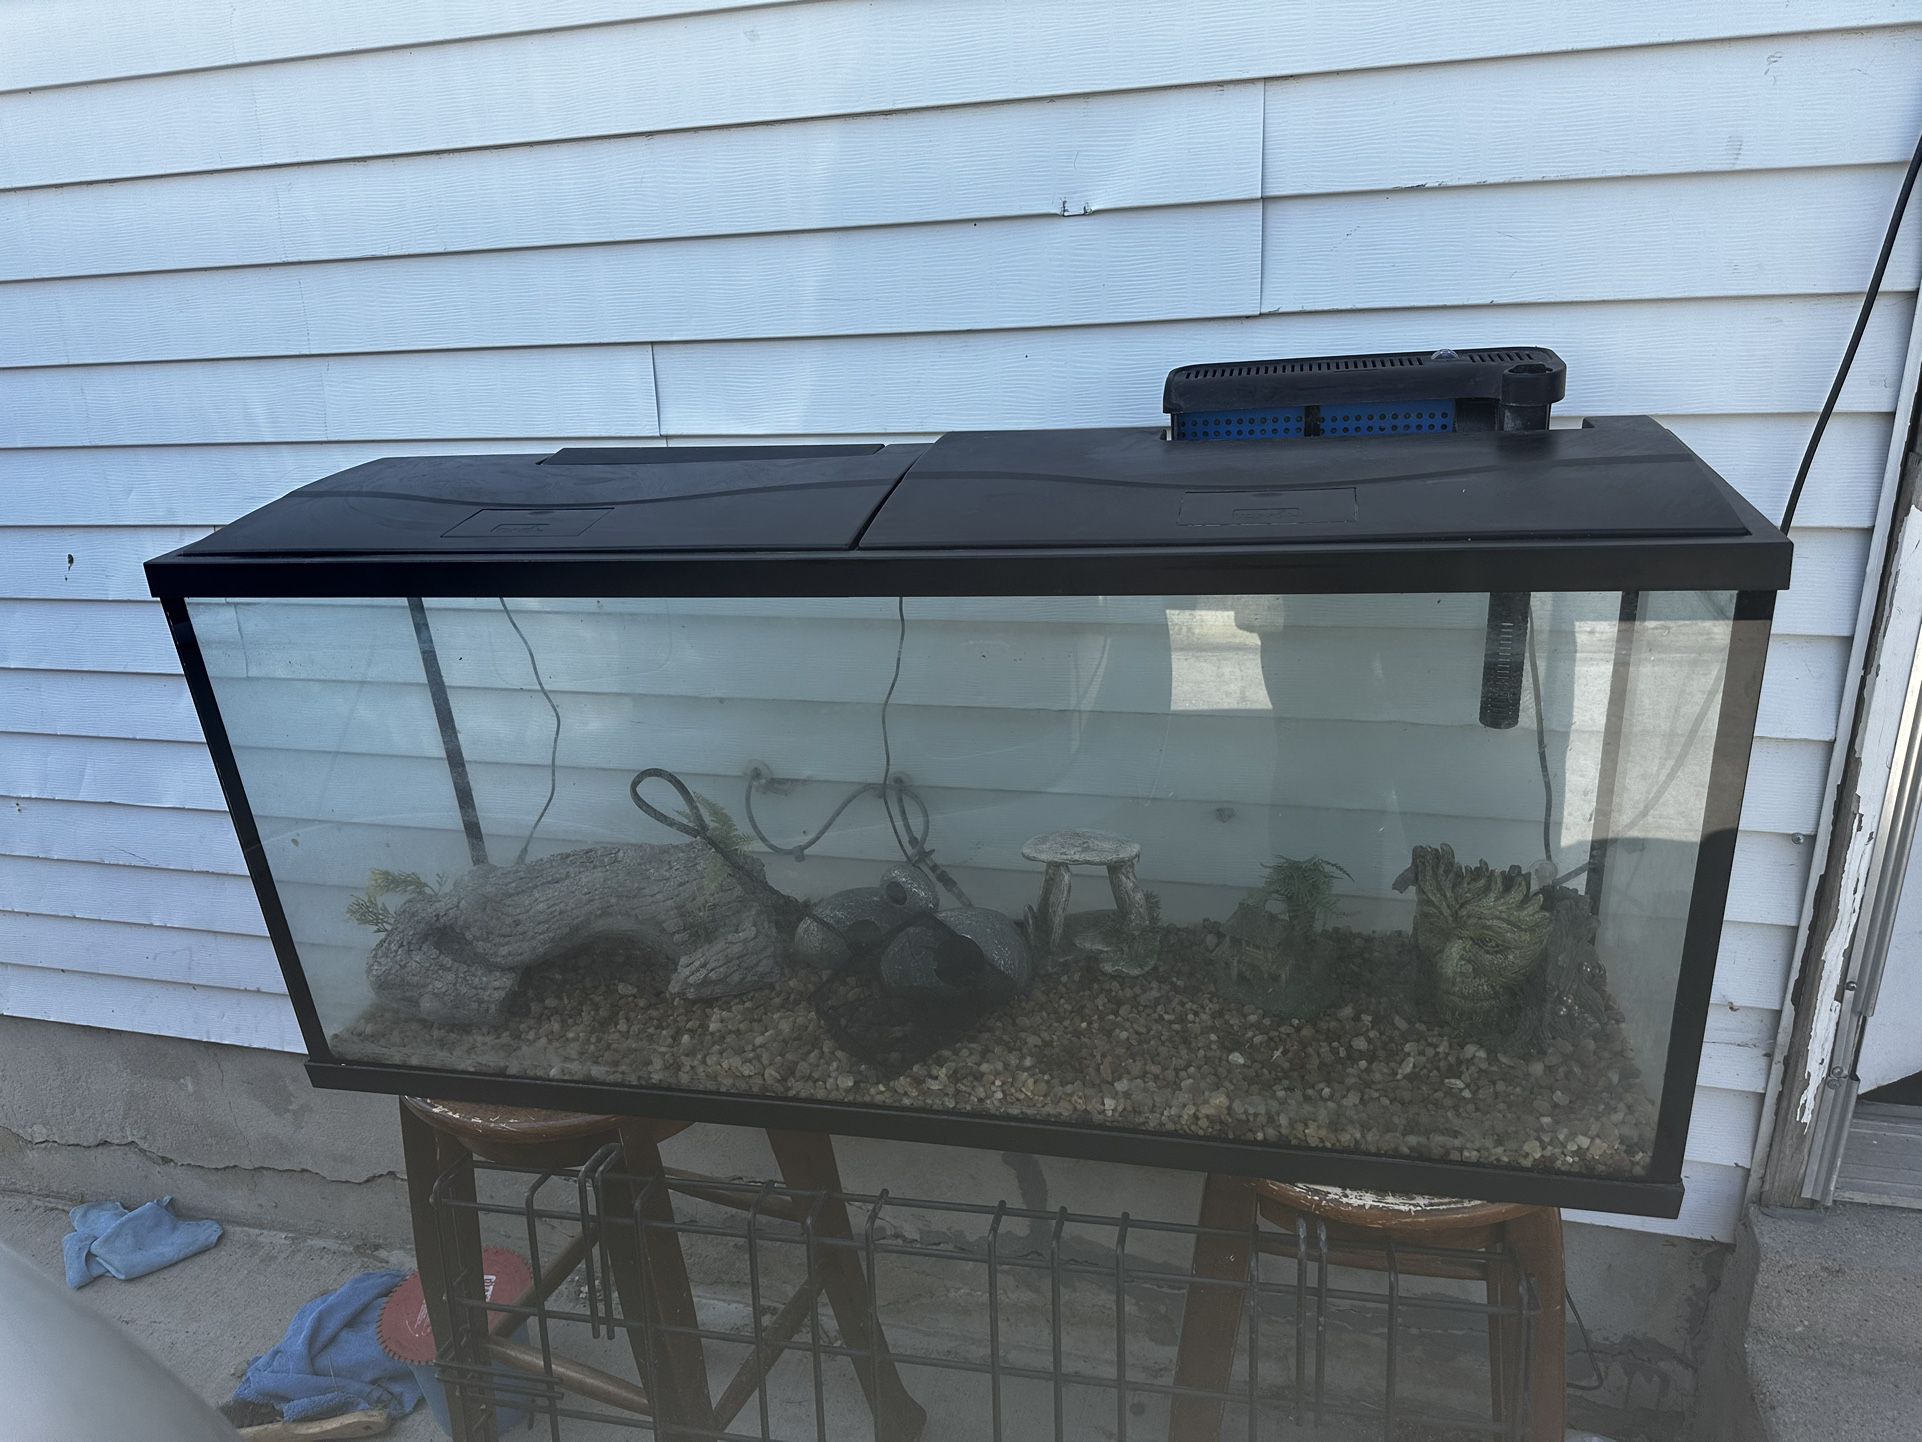 65 Gallon Fish Tank Moving Can’t Fit